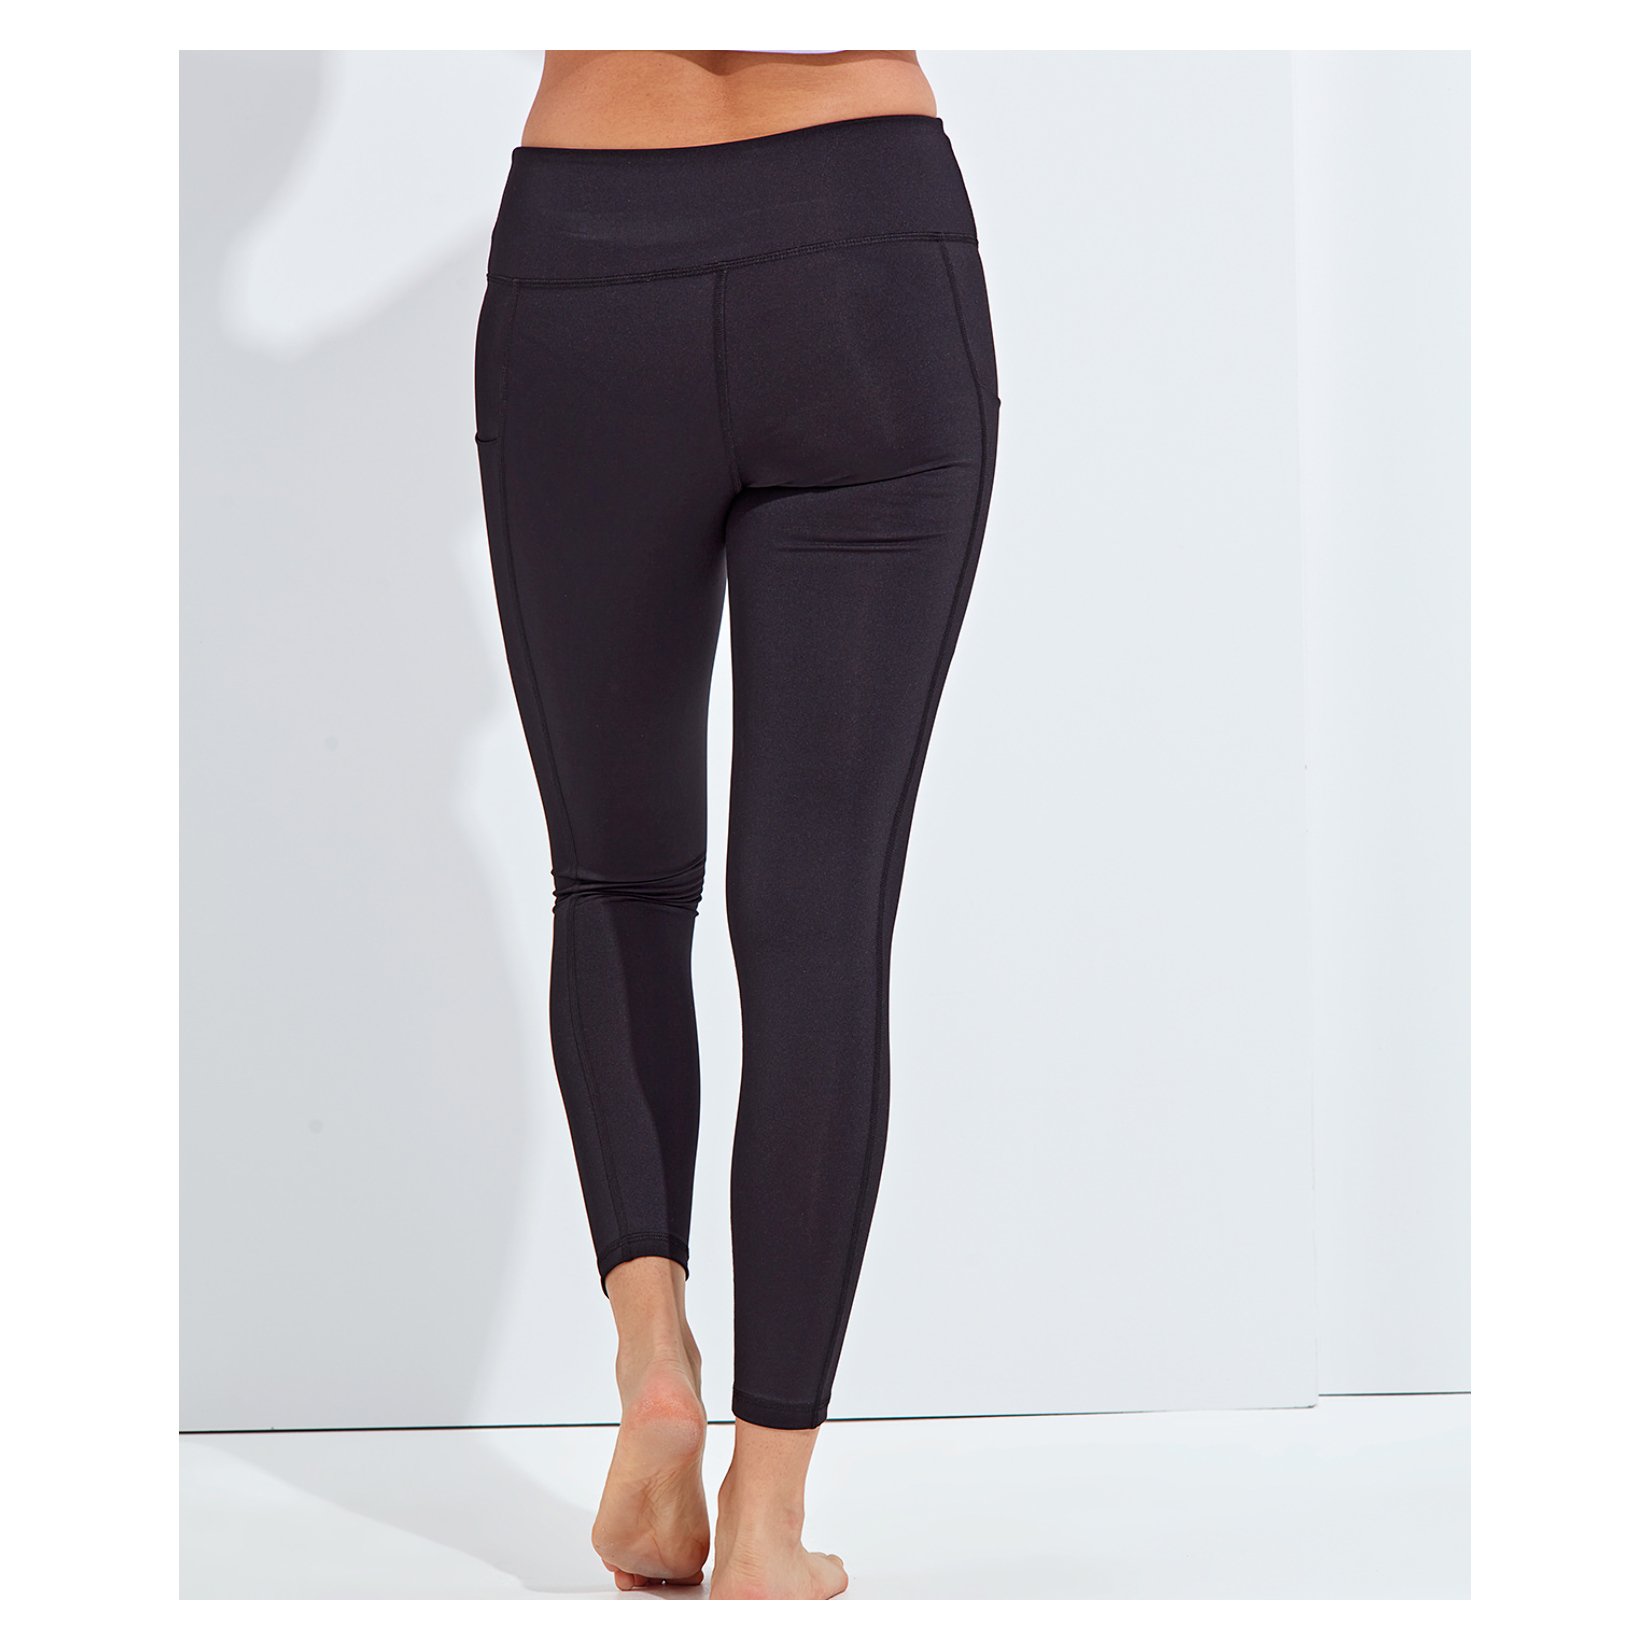 Womens Performance leggings with pockets